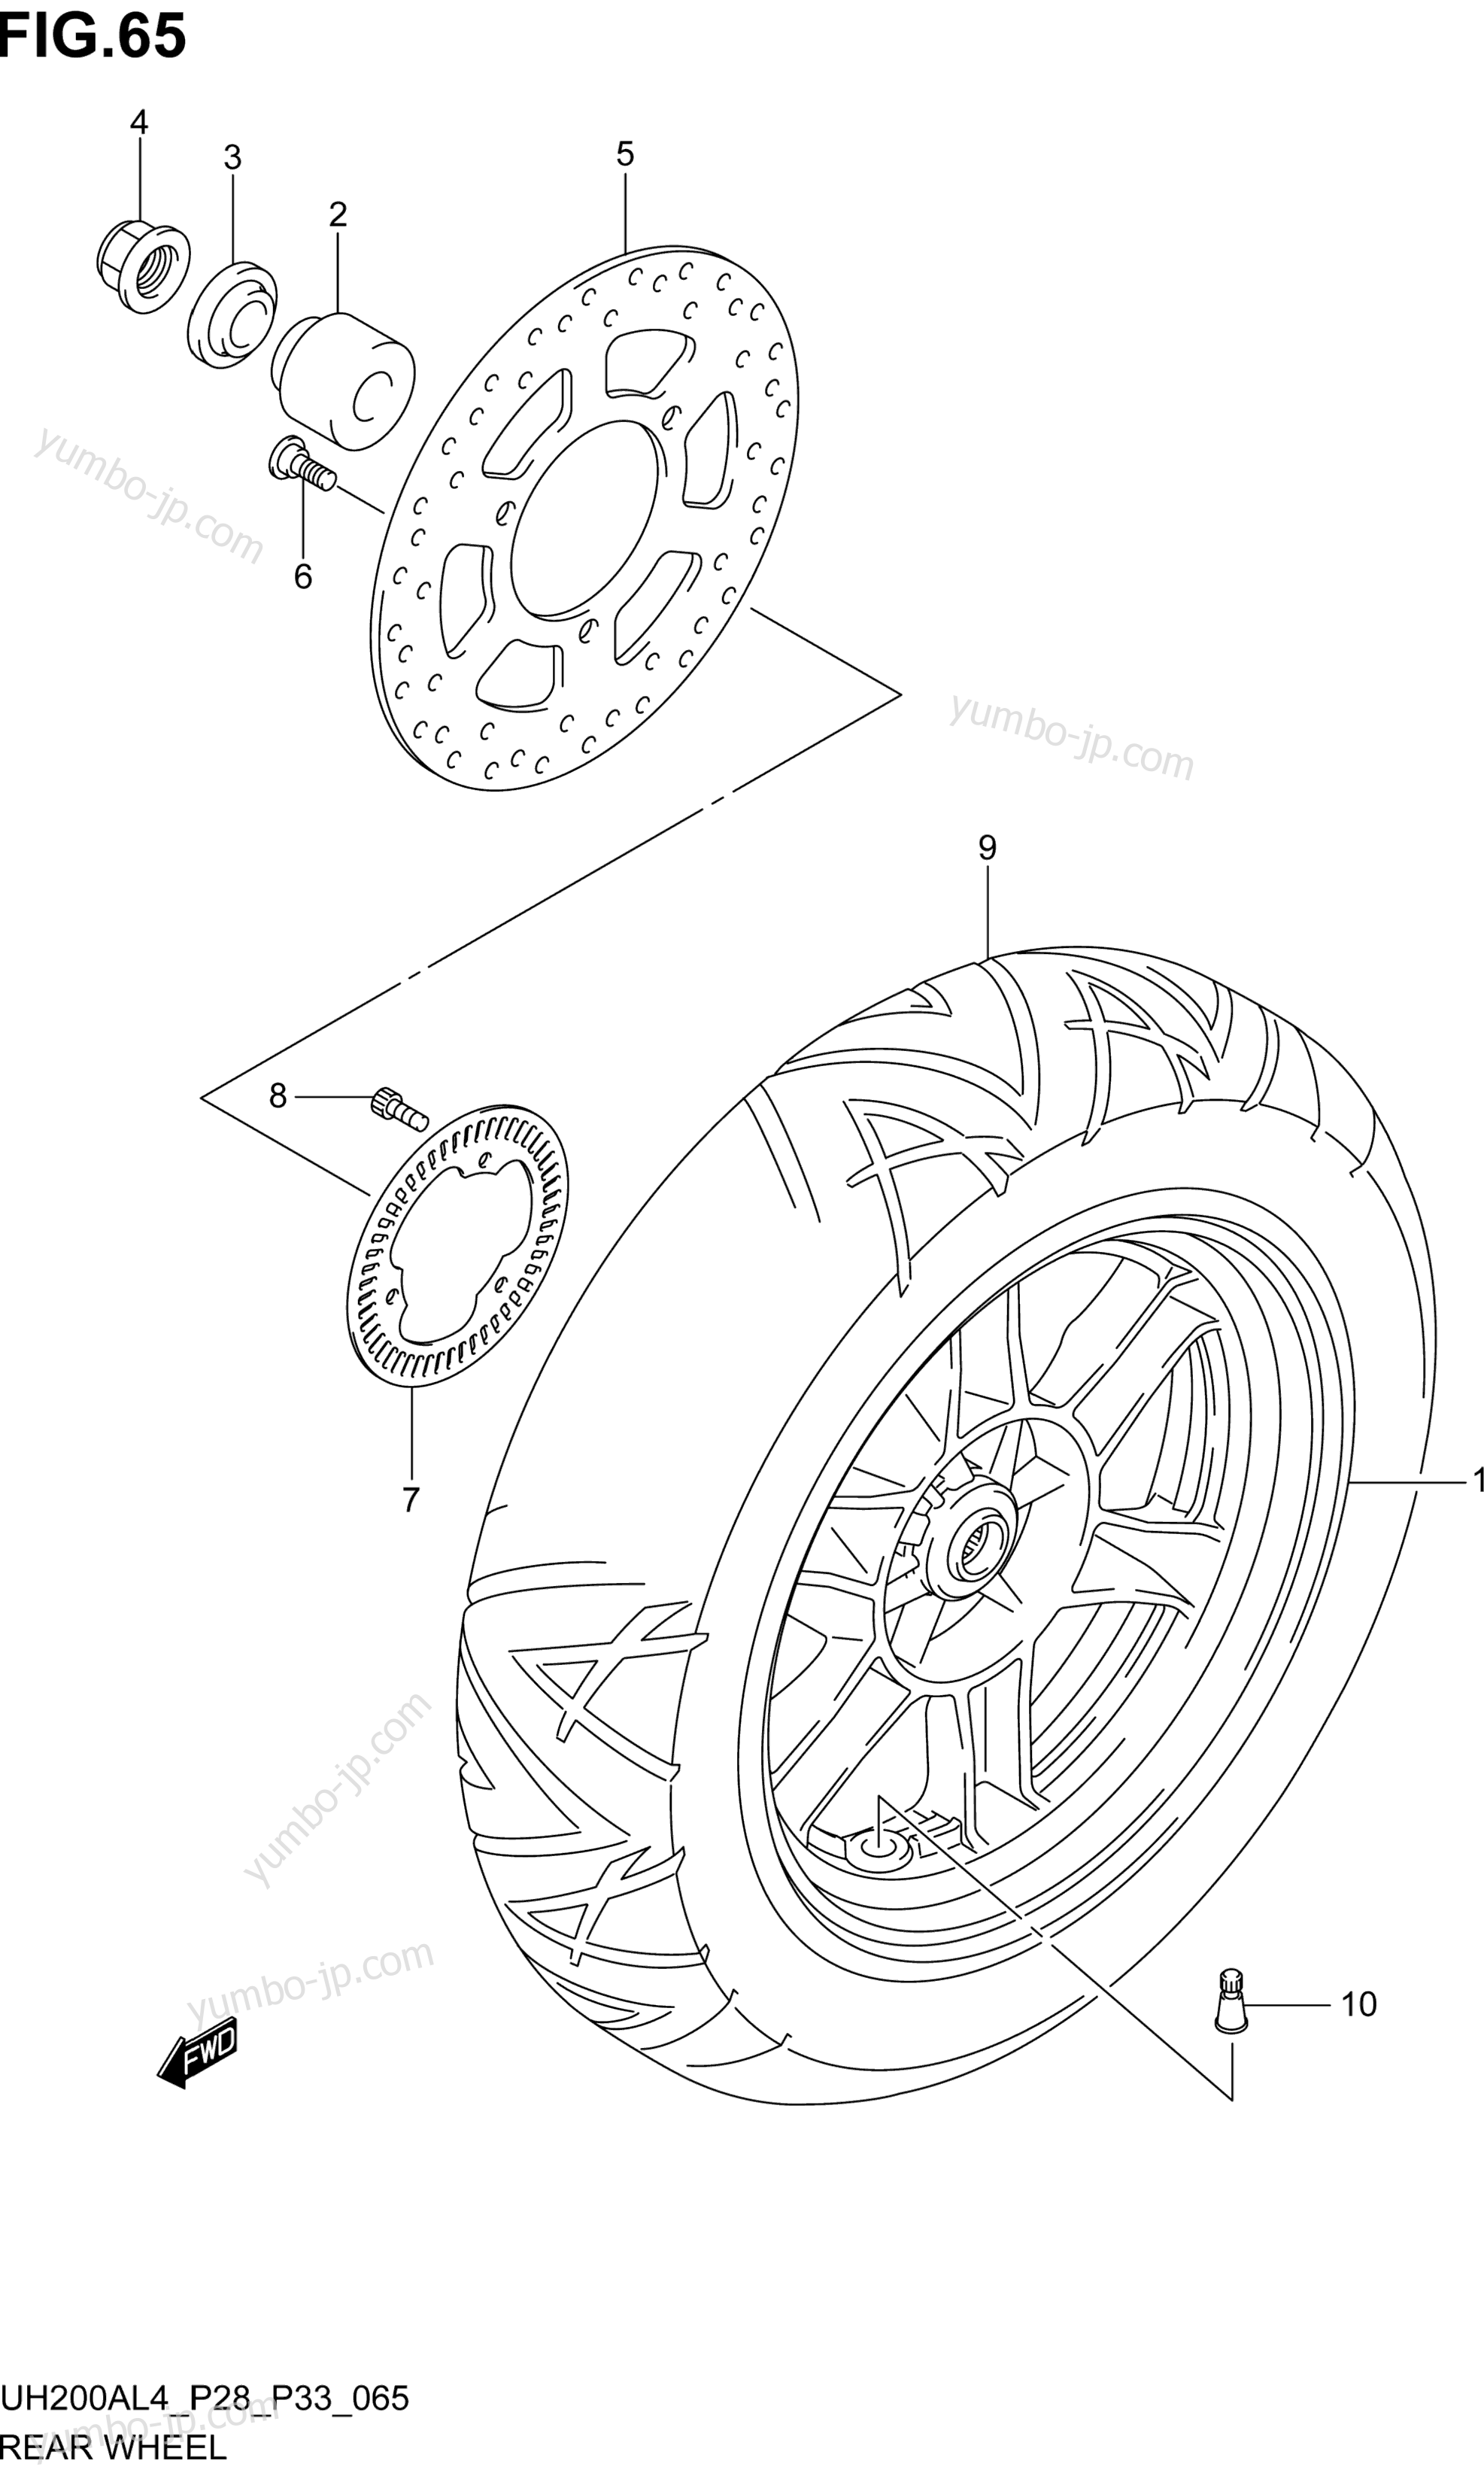 REAR WHEEL for scooters SUZUKI UH200A 2014 year